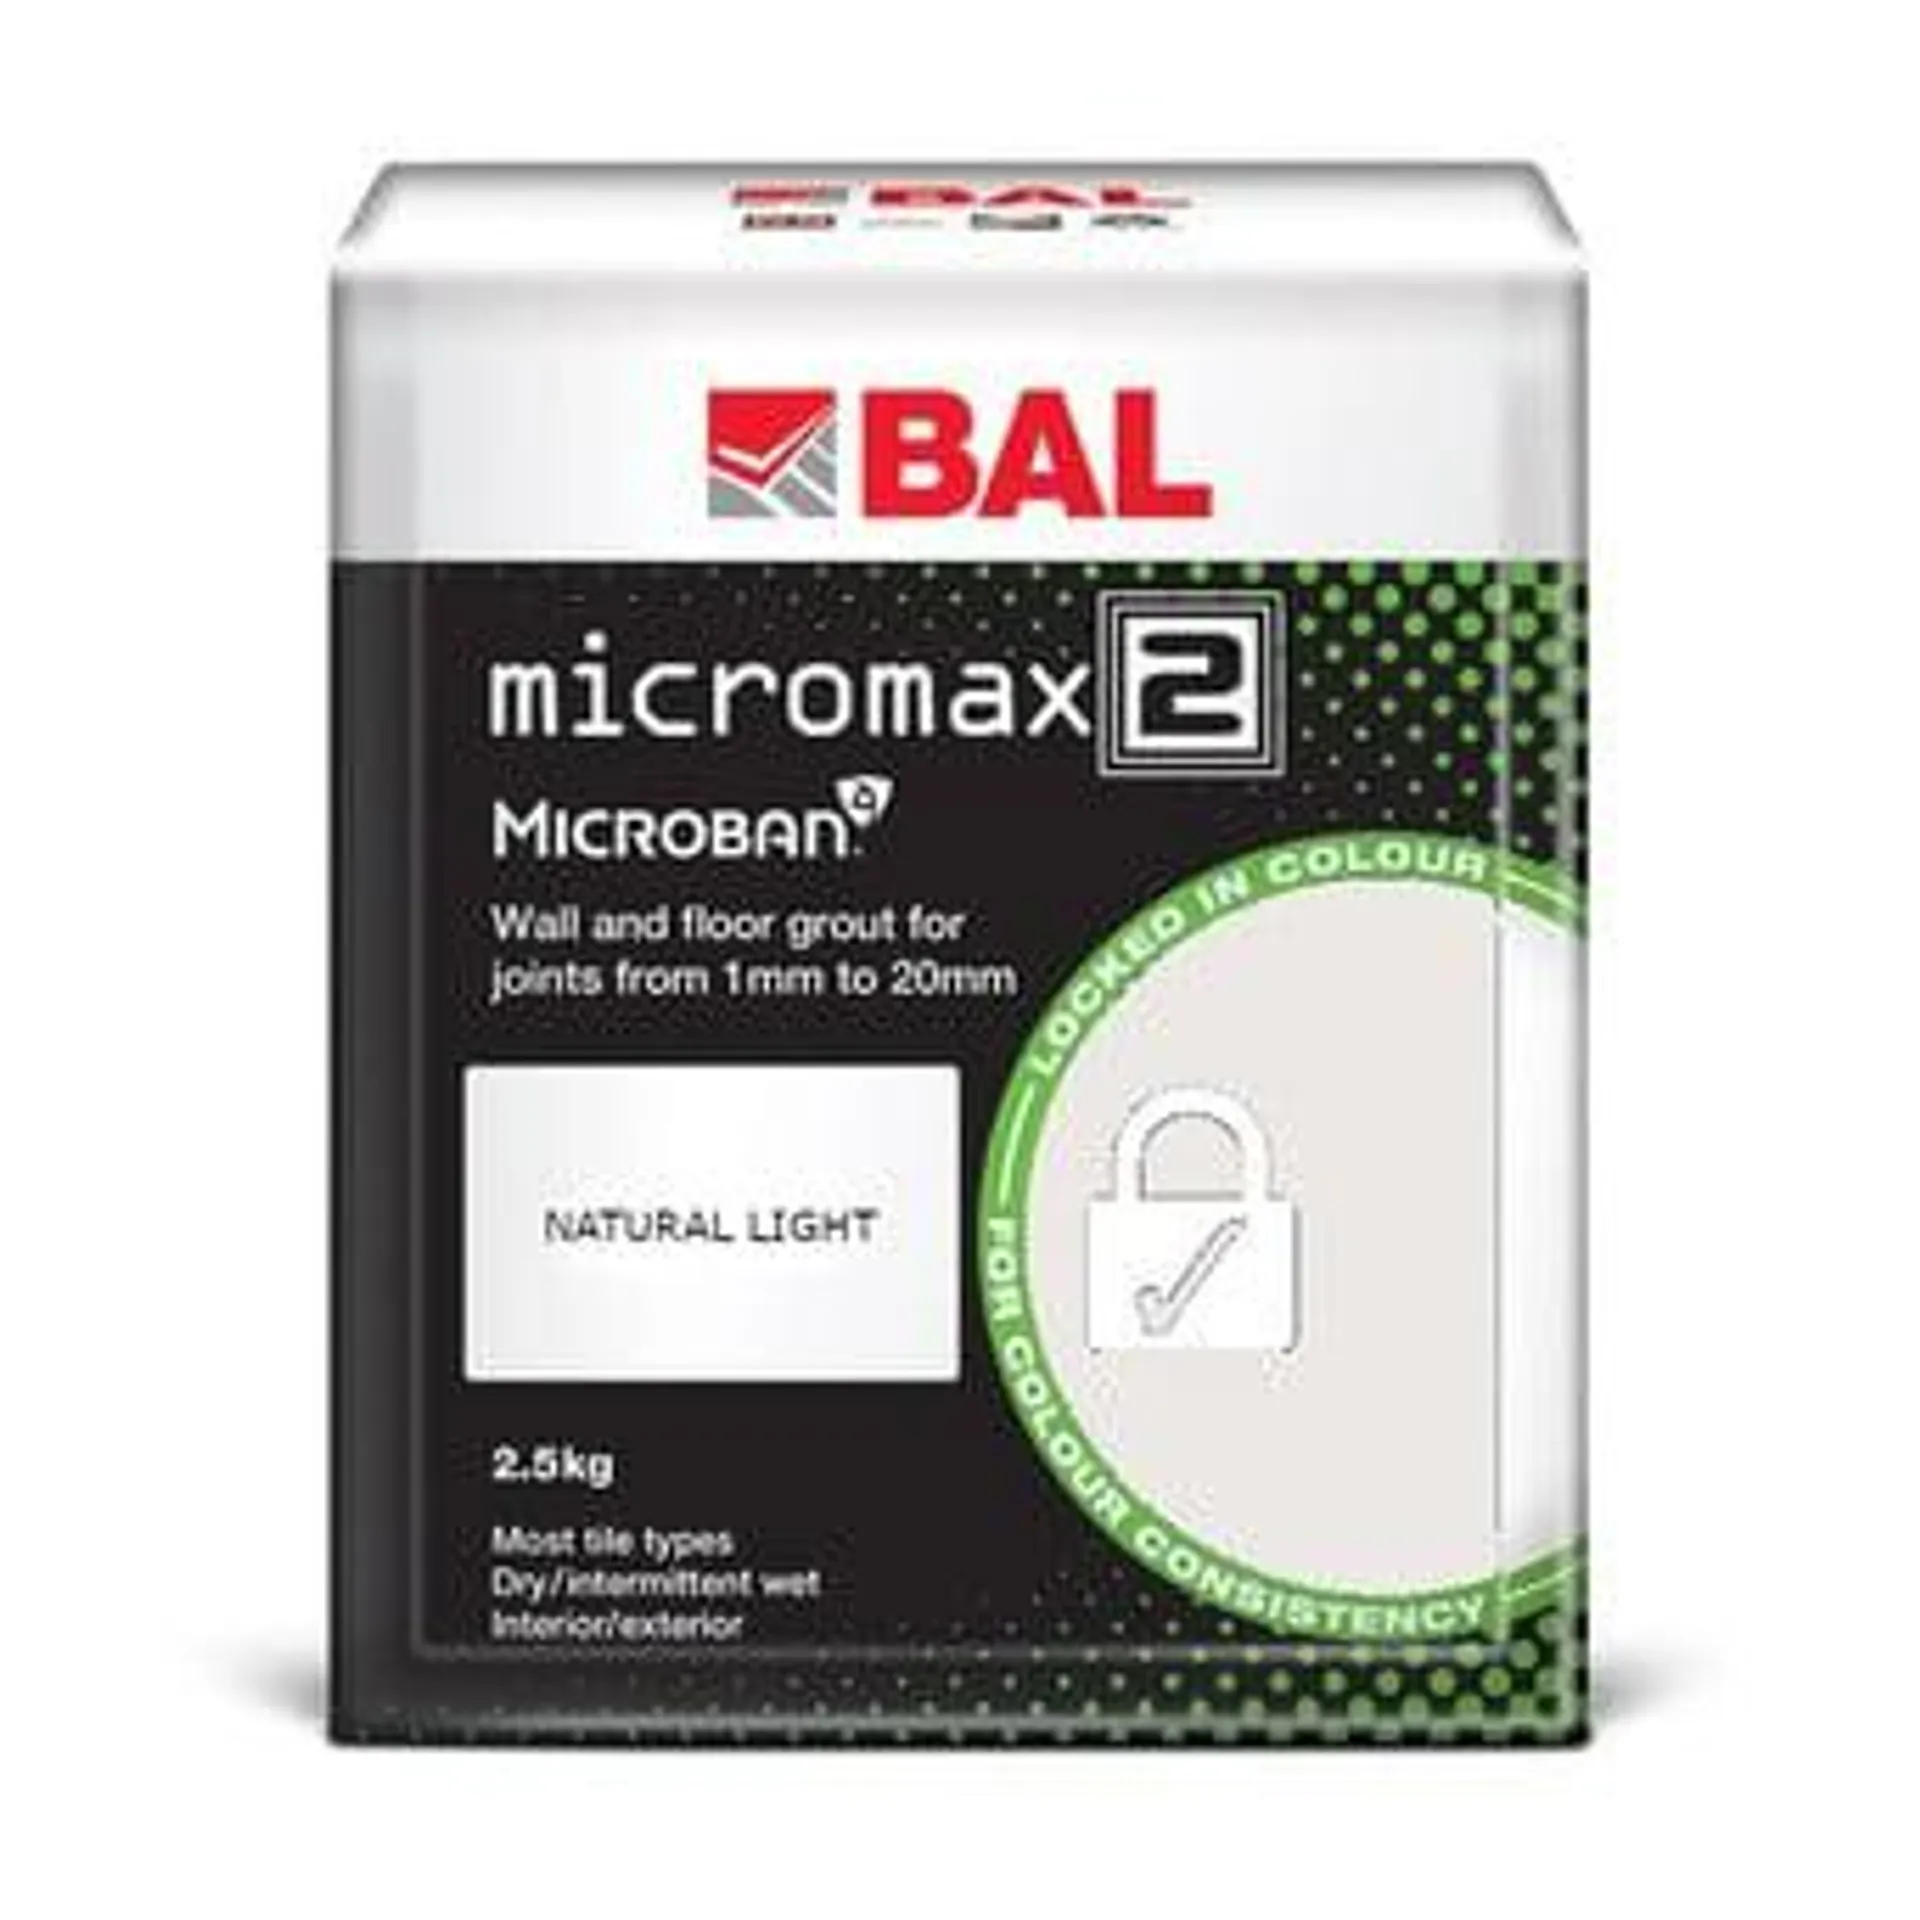 BAL Micromax2 Grout Colour Editions Natural Light 2.5kg